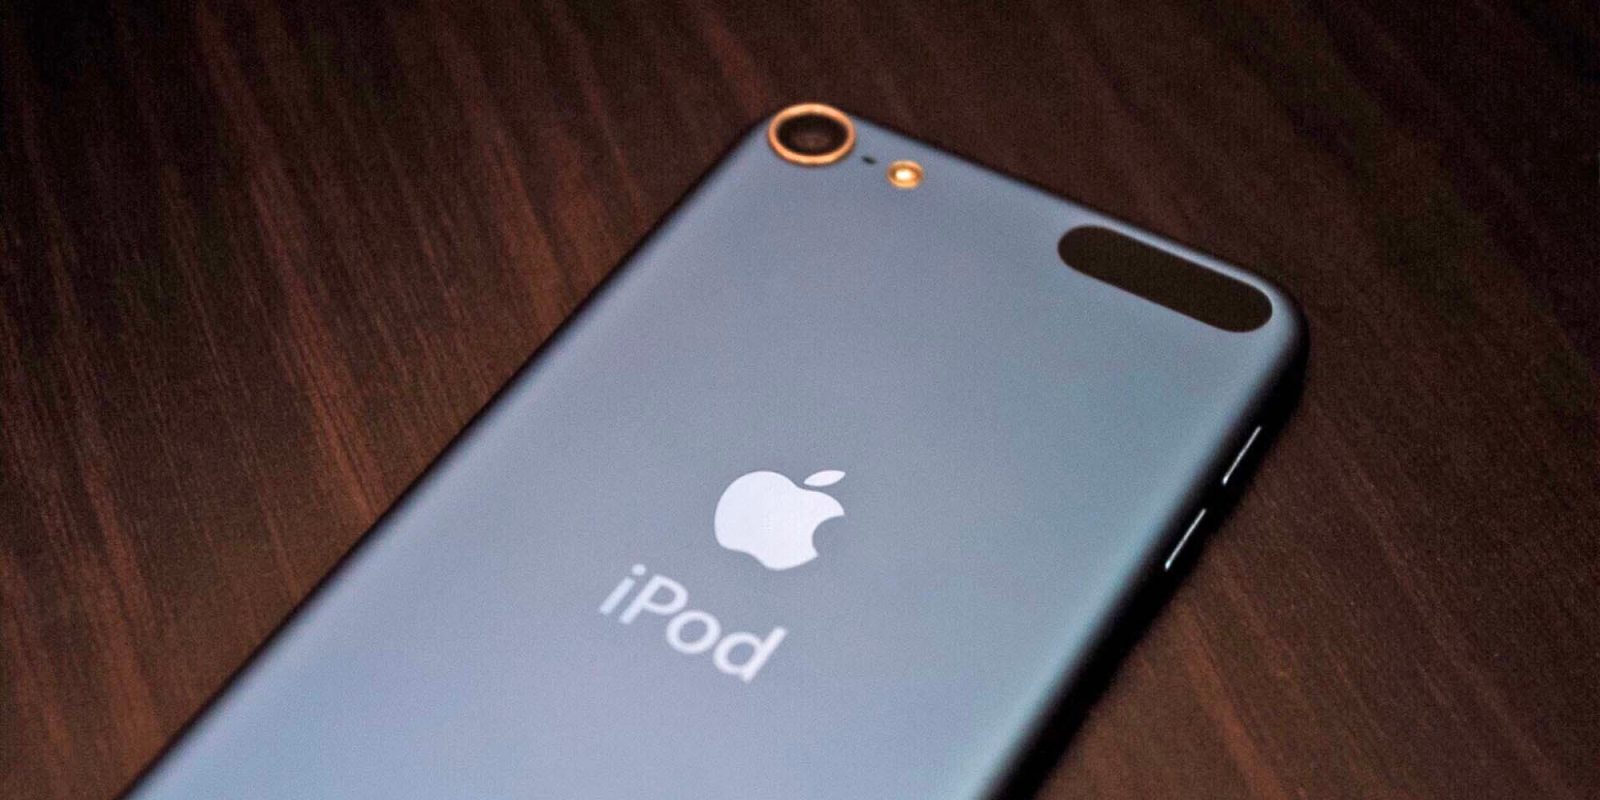 iPod resale value has depreciated 89% on average, 3% boost since brand discontinued